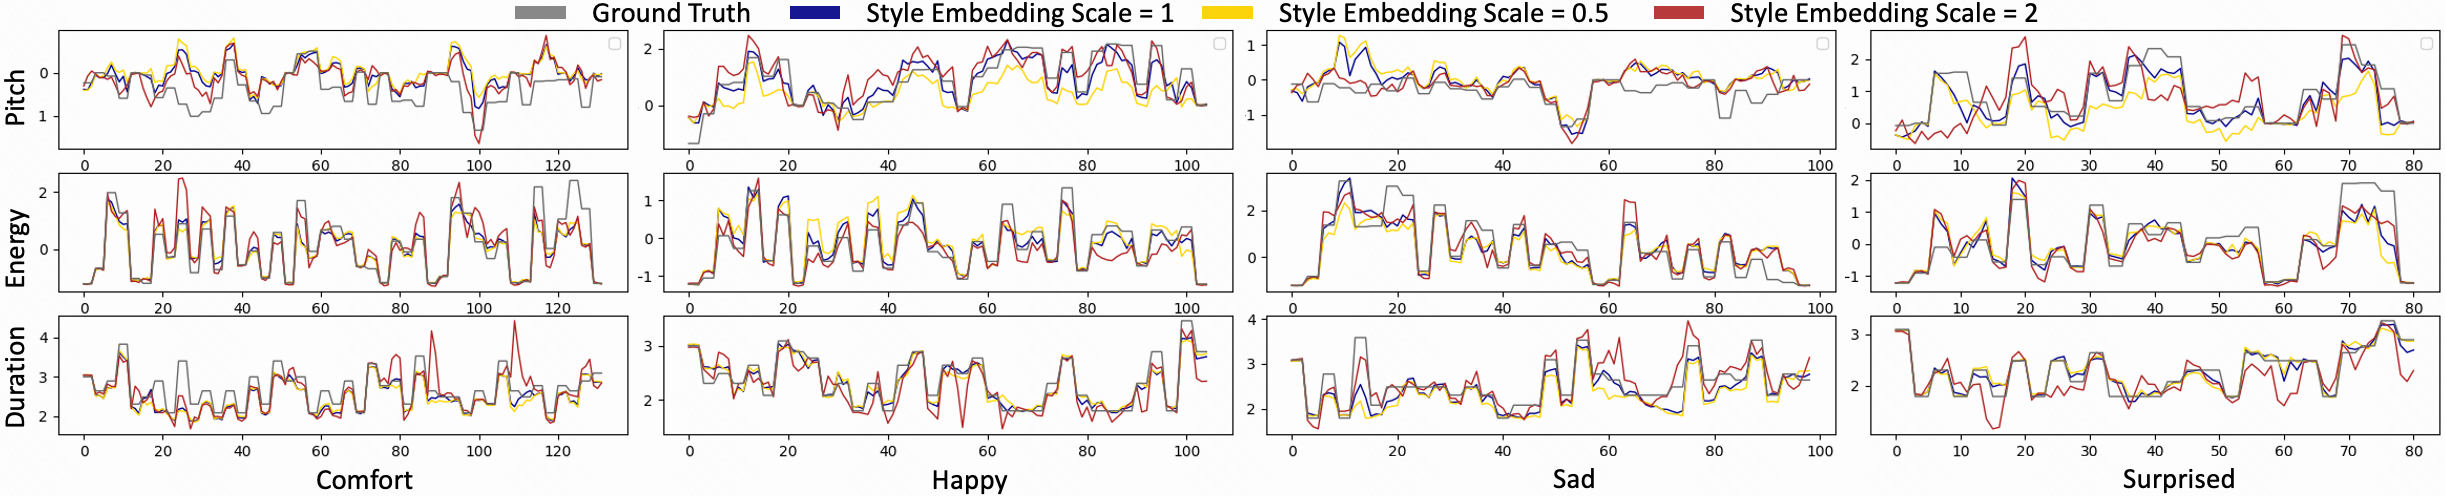 Prosody features predicted by scaling global style embedding(The abscissa represents the phoneme length).